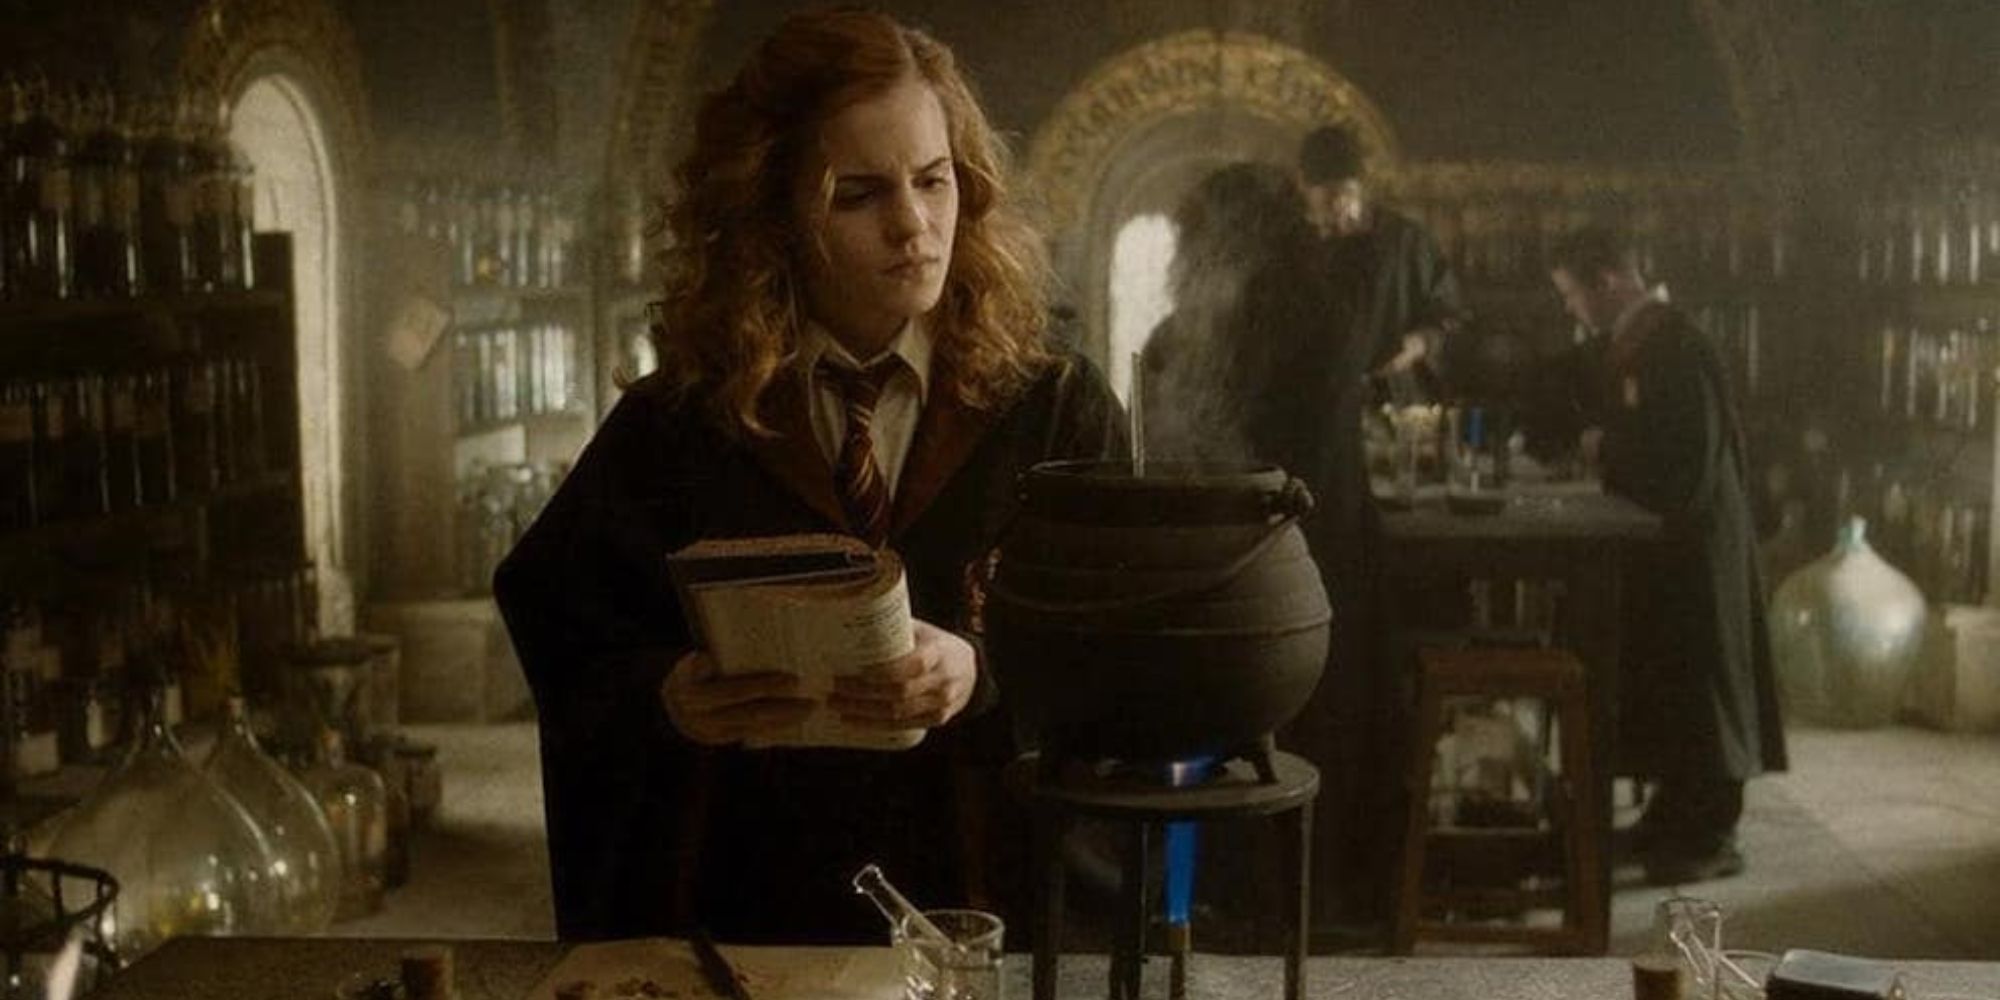 Hermione looks at a potion in confusion while holding instruction book